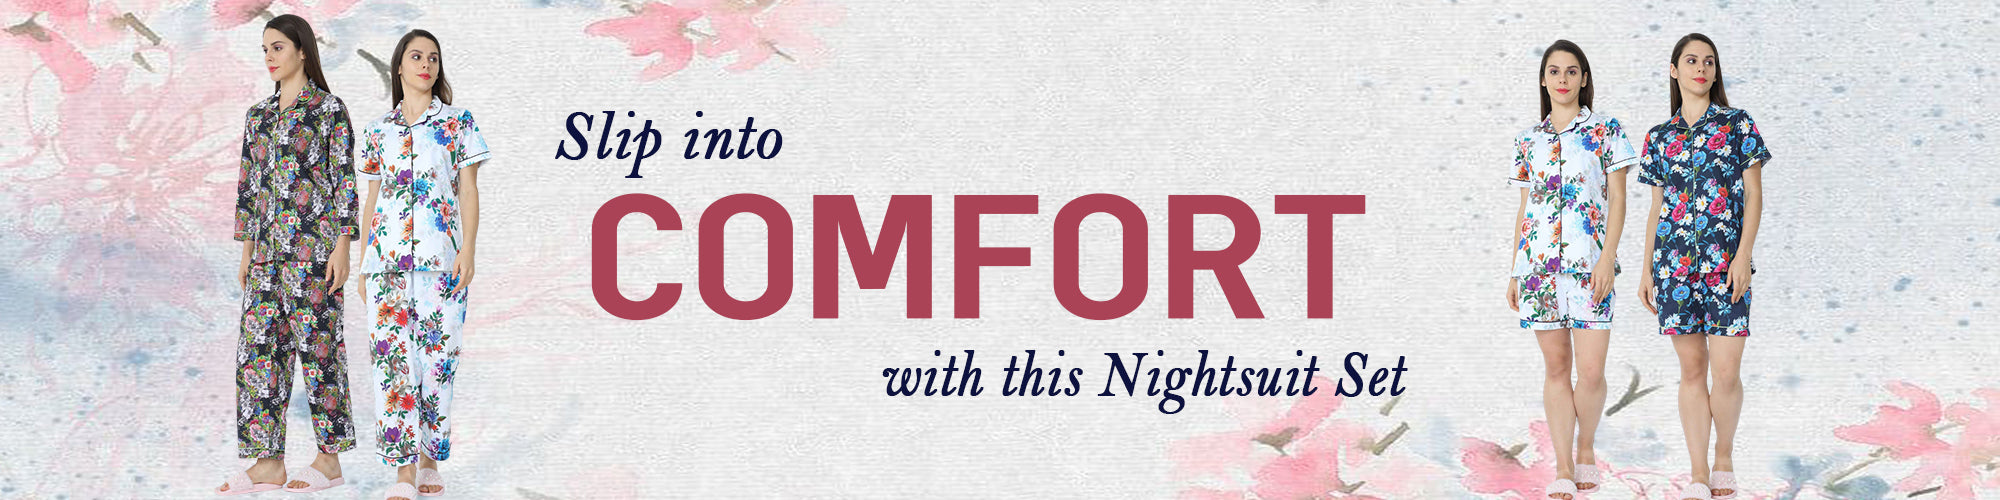 Night Suit set with comfort - banner